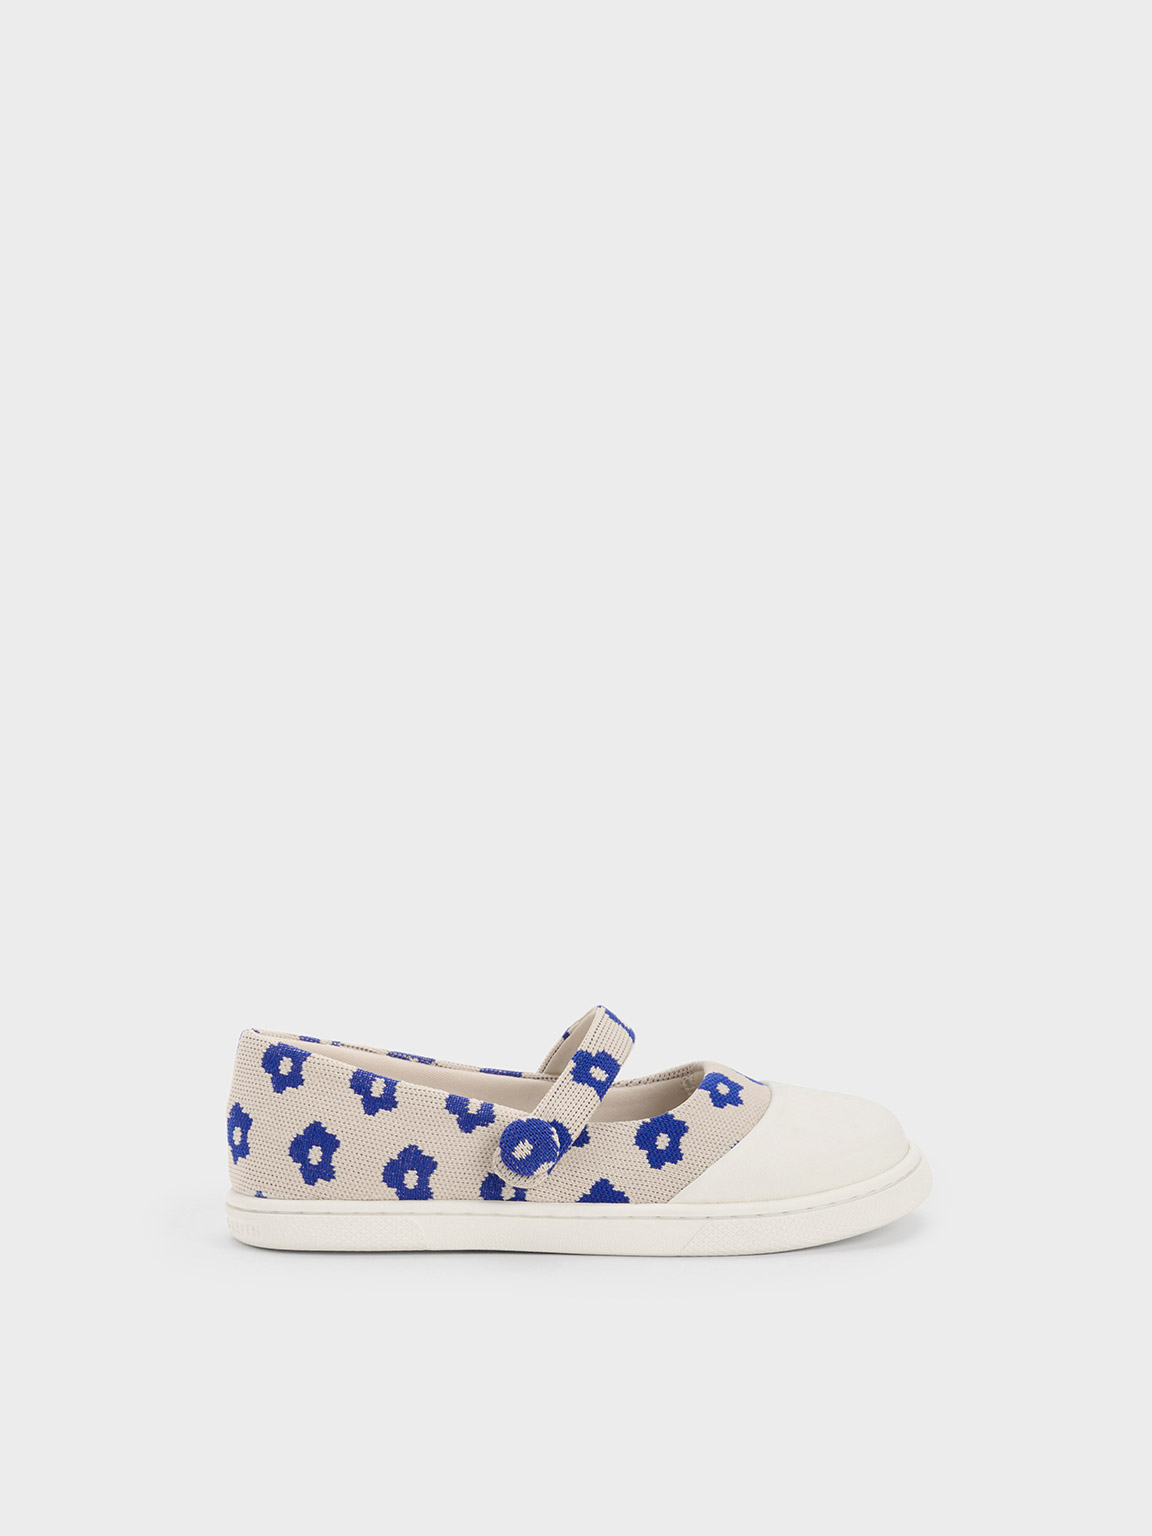 Girls’ Toe-Cap Floral Print Mary Janes